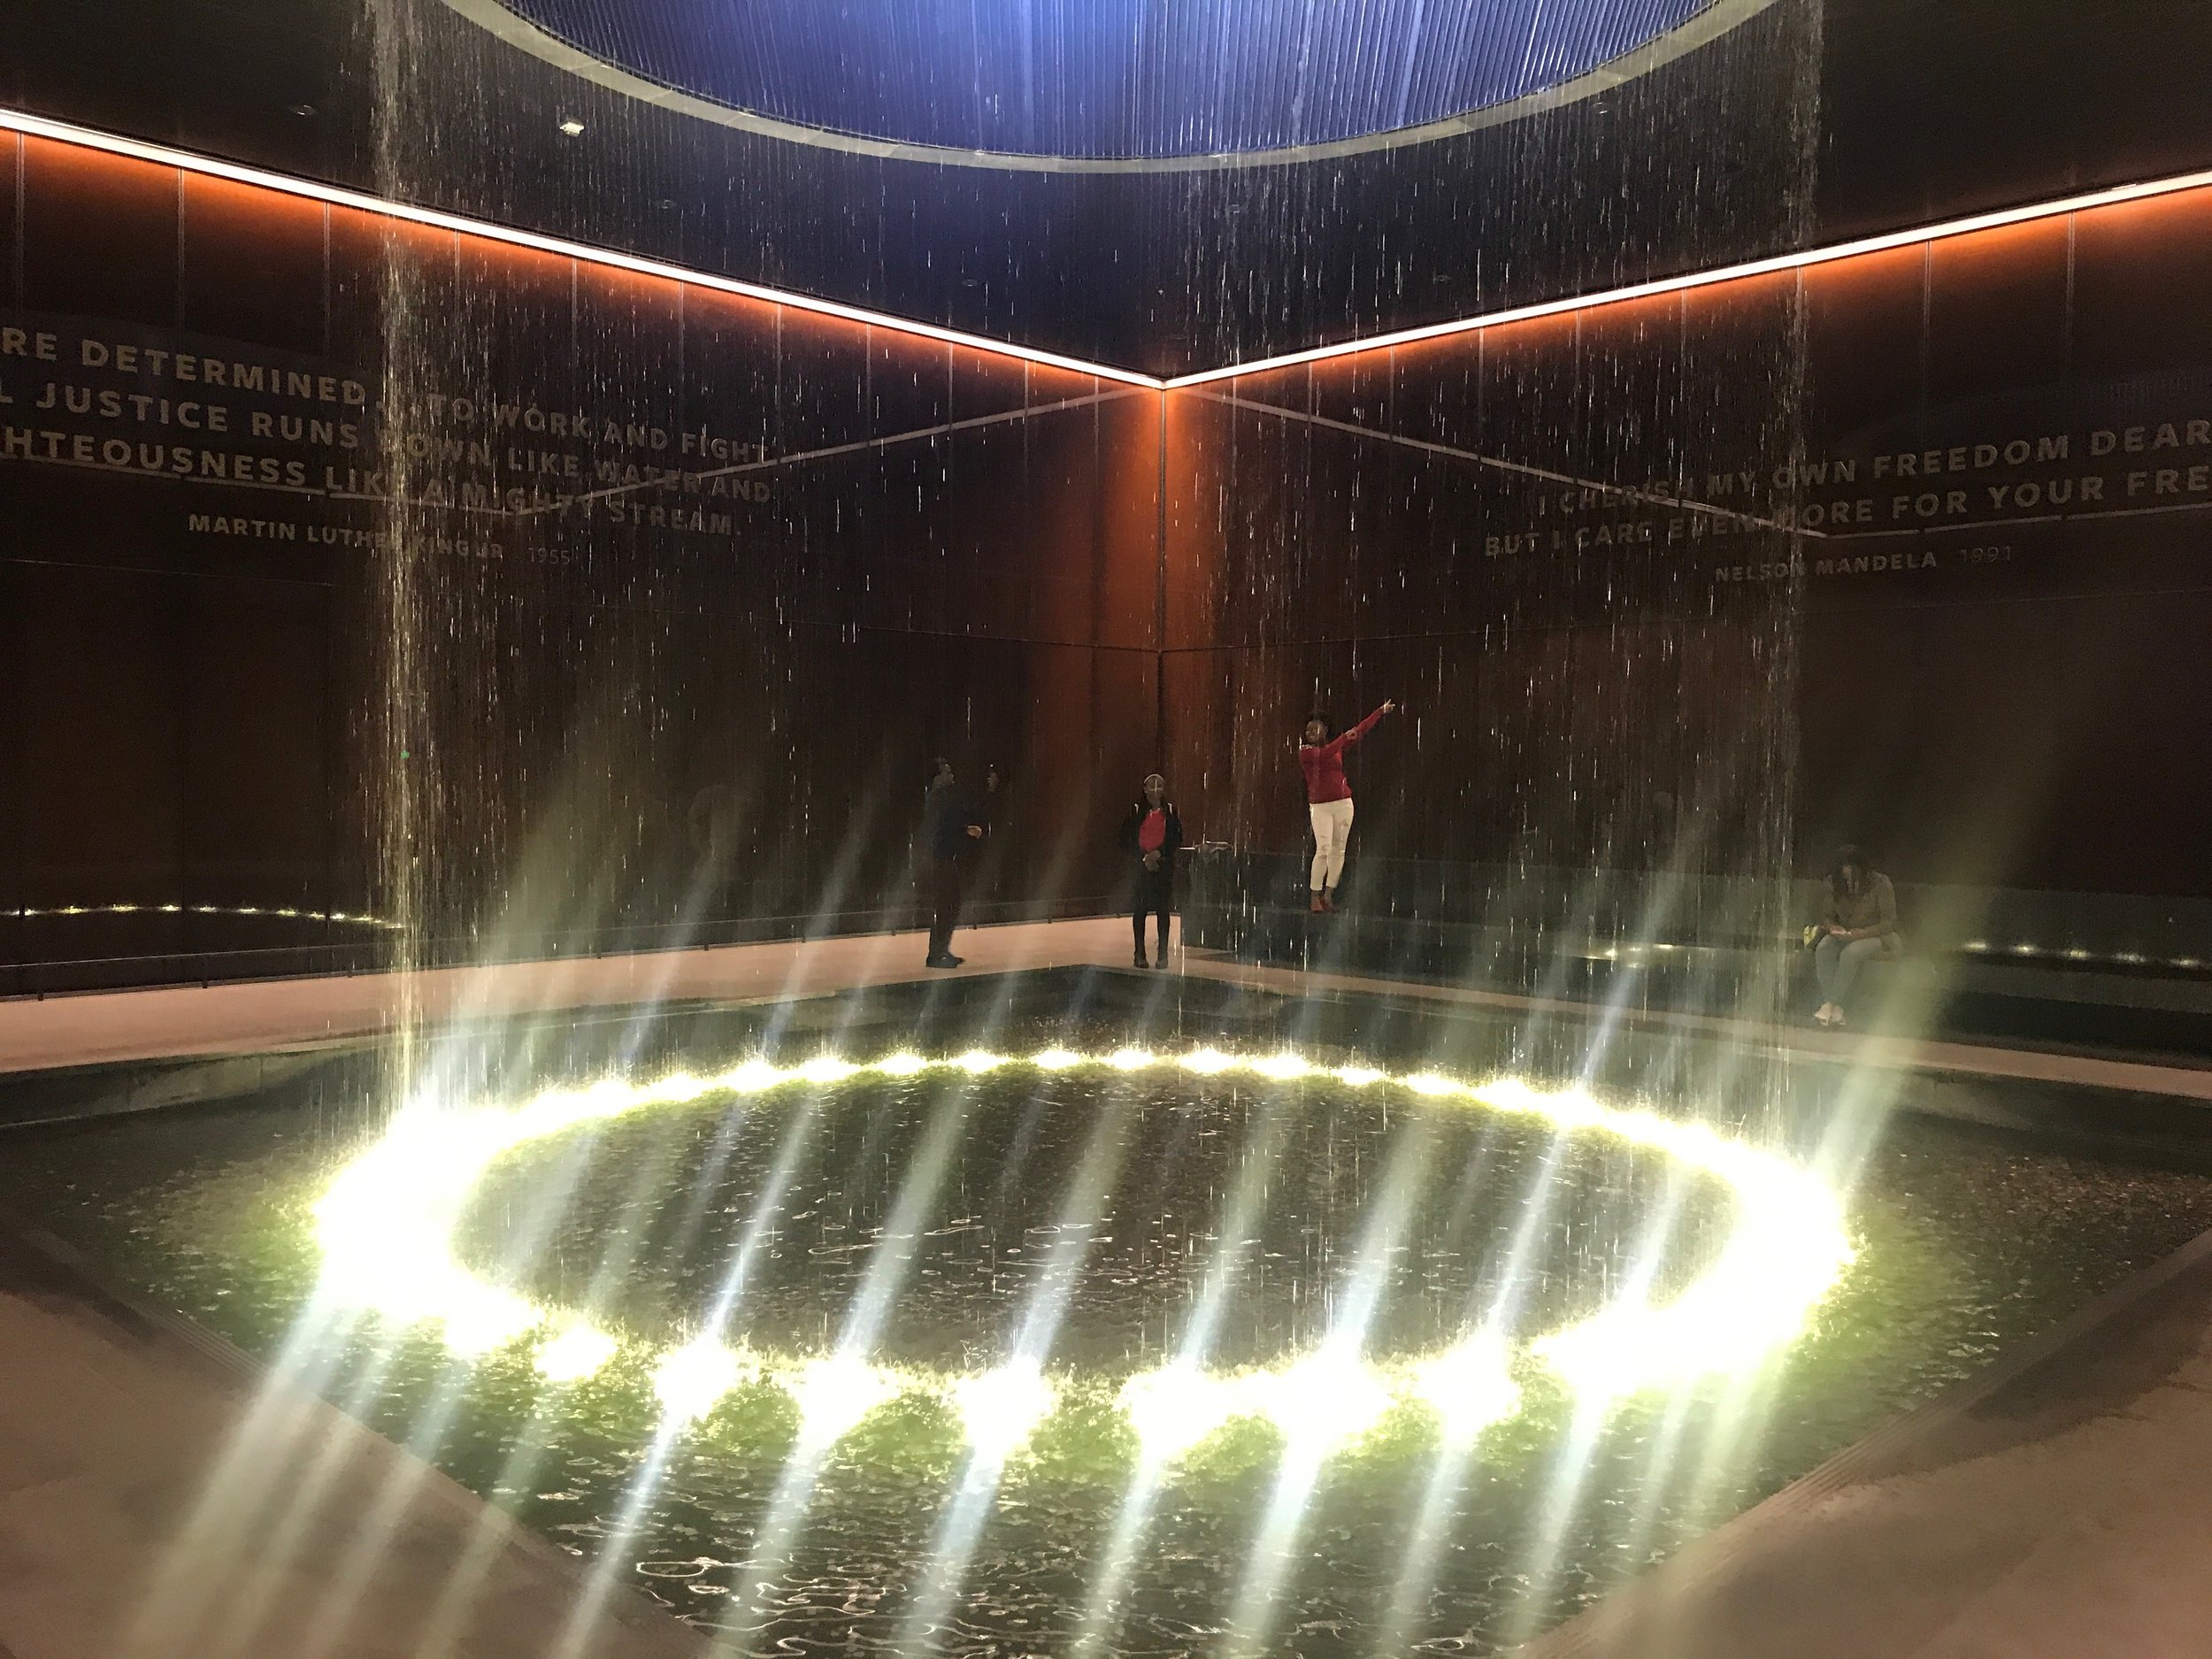  An indoor waterfalls provides a contemplative spot inside the National Museum of African American History and Culture.      